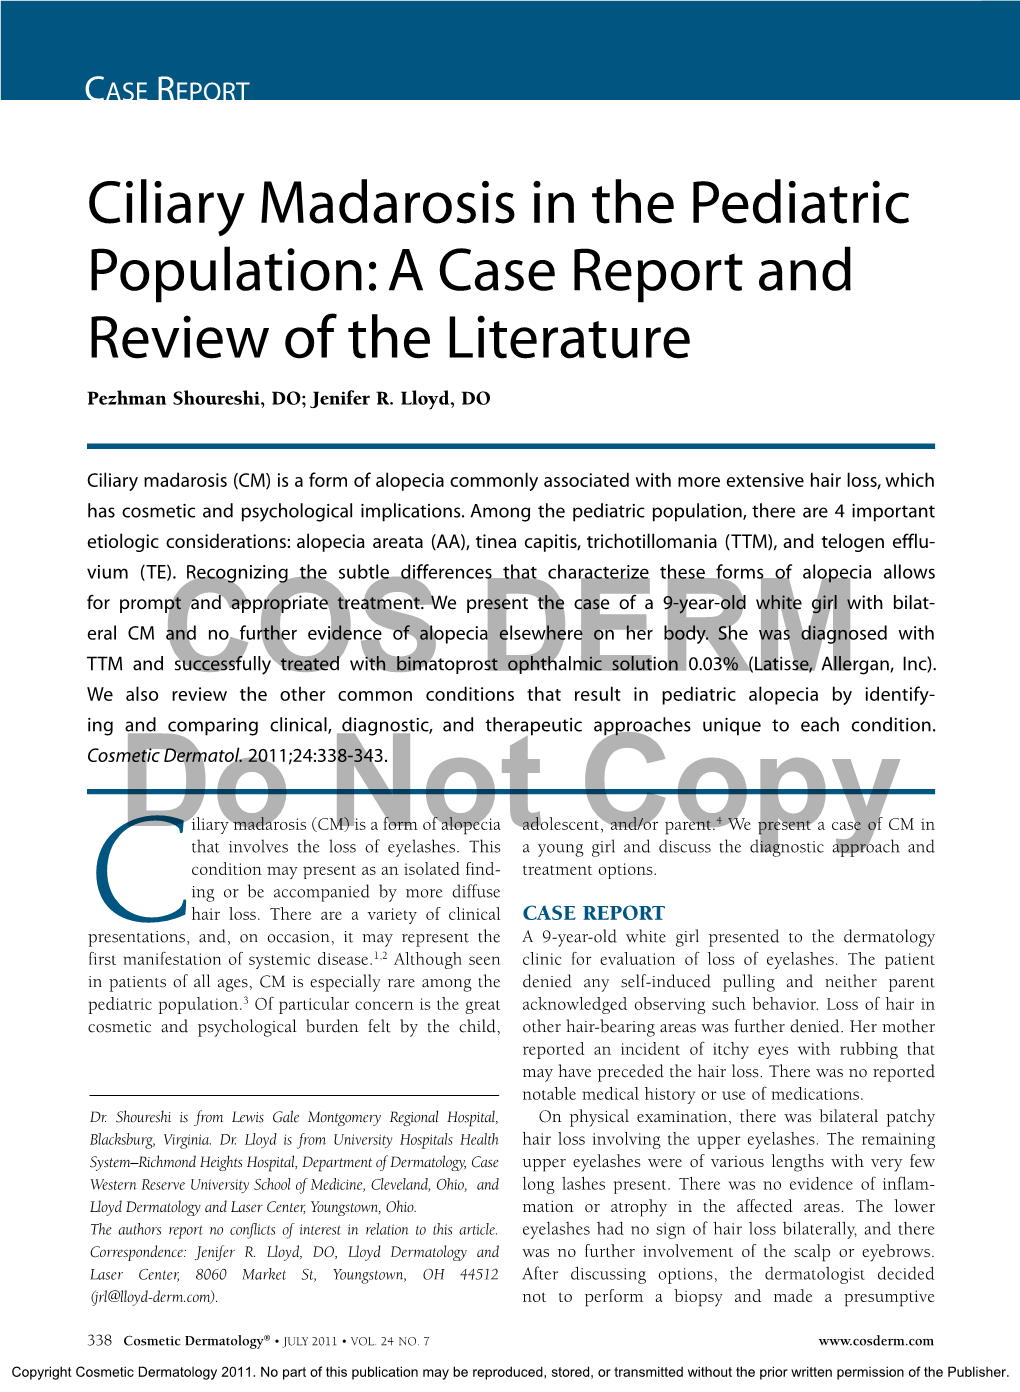 Ciliary Madarosis in the Pediatric Population: a Case Report and Review of the Literature Pezhman Shoureshi, DO; Jenifer R